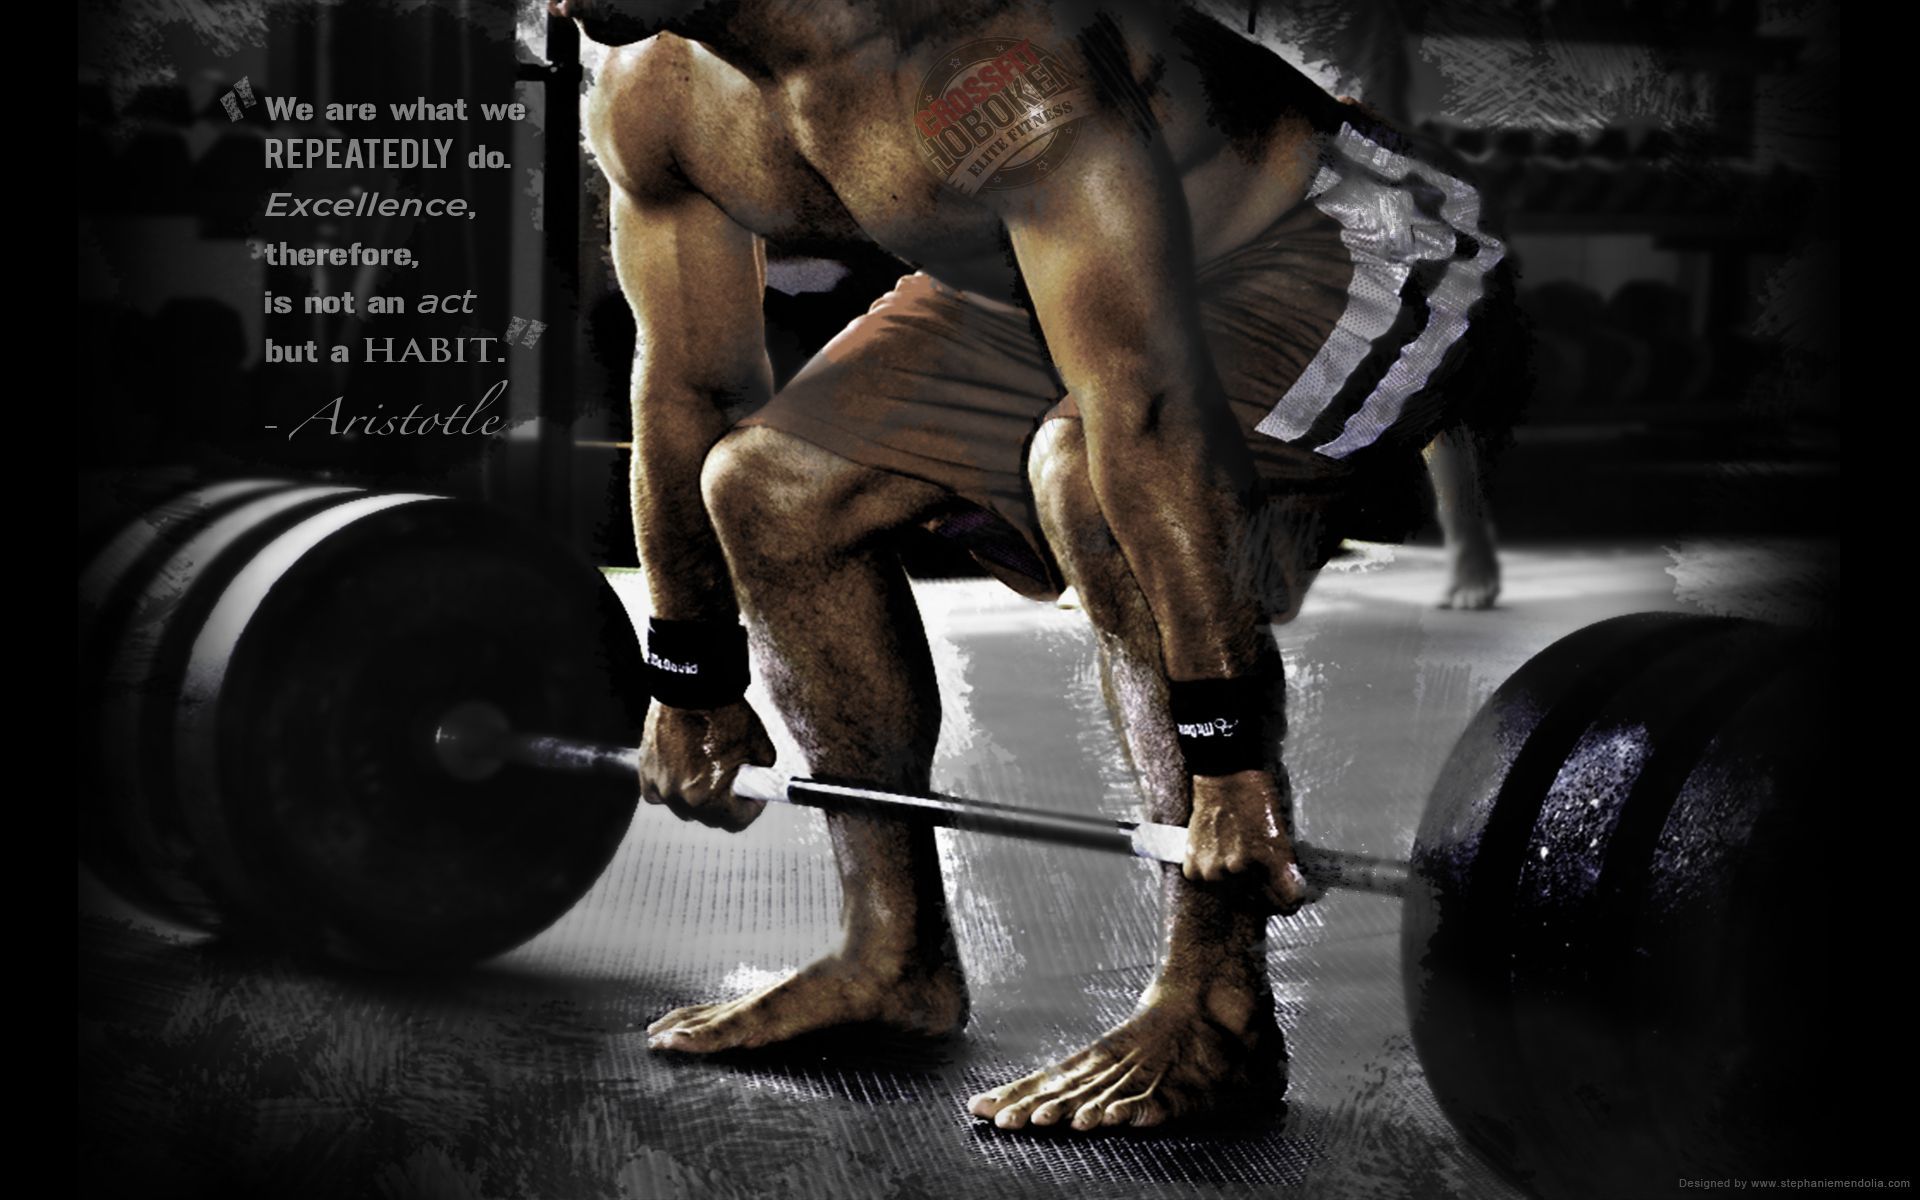 Crossfit Background